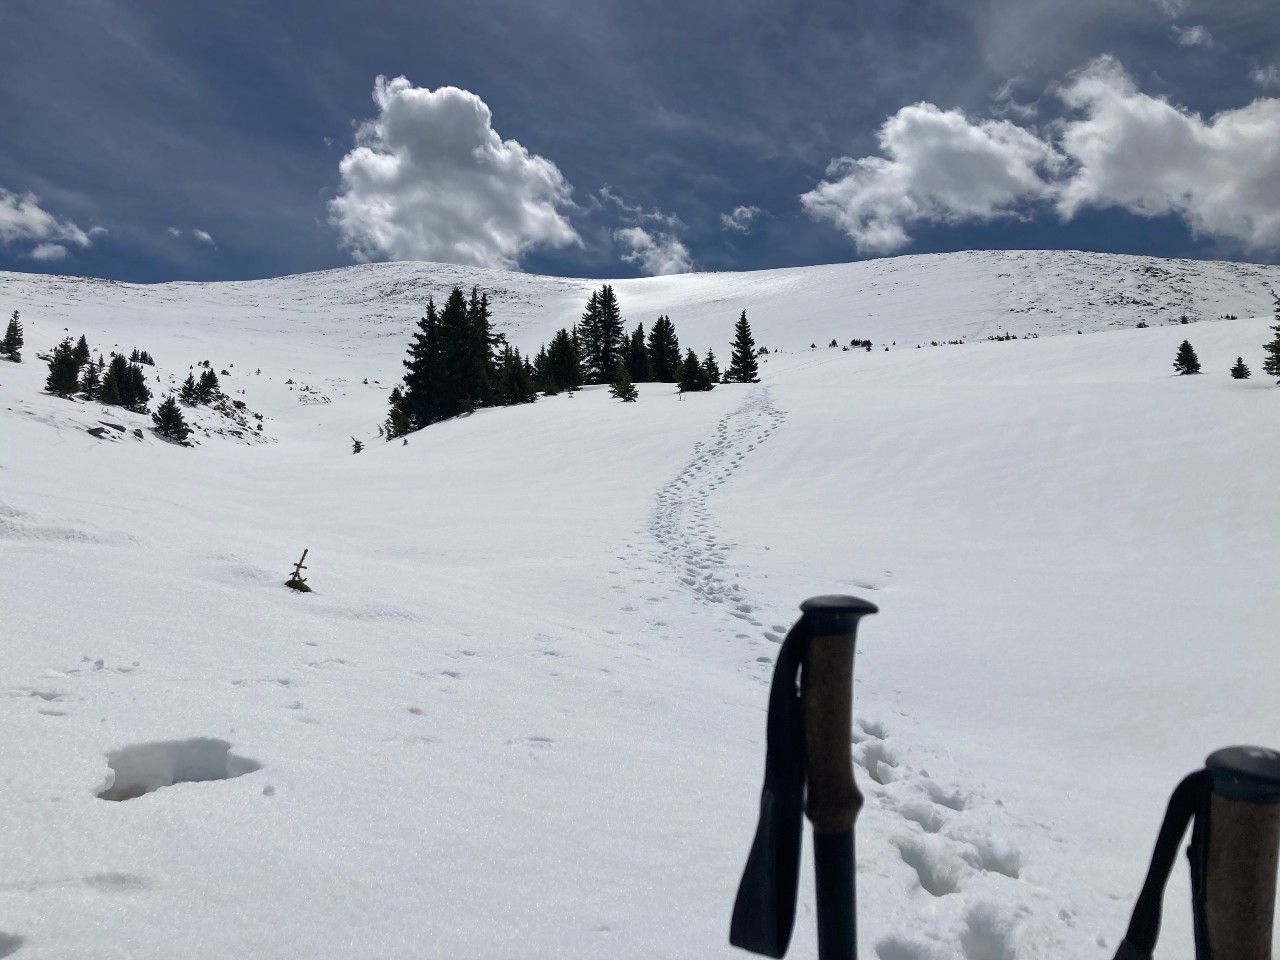 Snowy peak with footprints leading out of sight and ski poles in the foreground